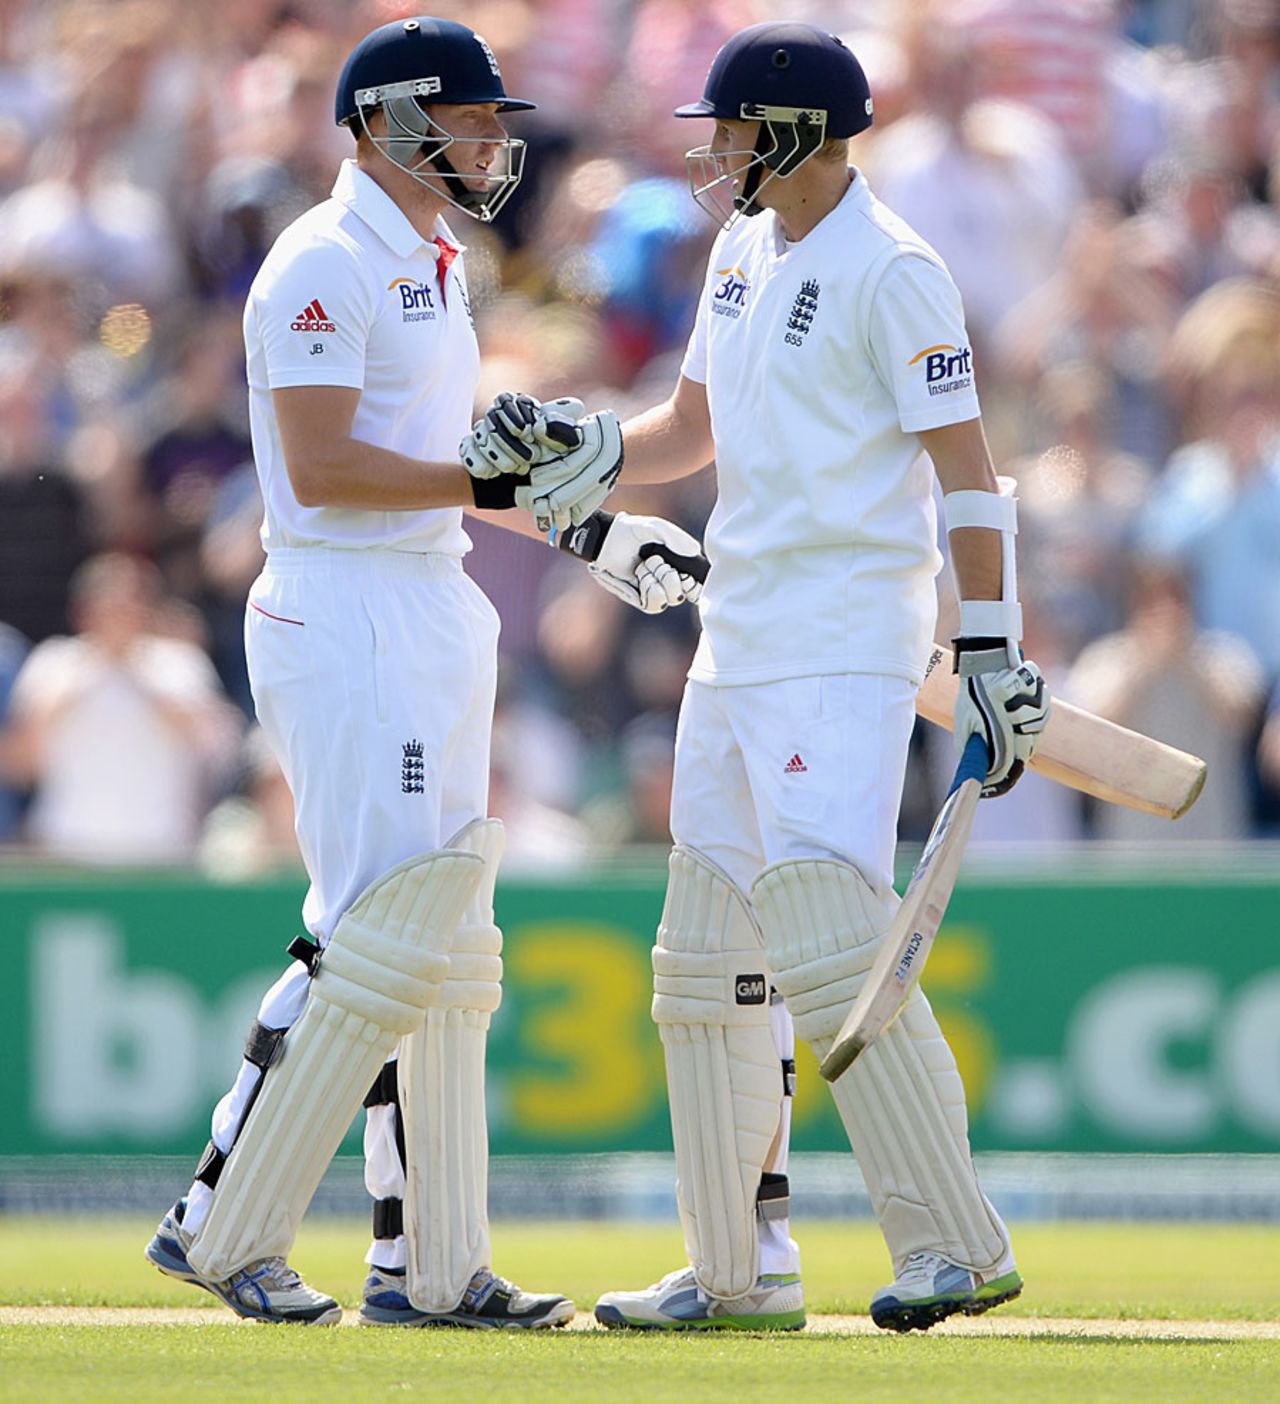 Yorkshire's very own pair of Jonny Bairstow and Joe Root at the crease, England v New Zealand, 2nd Investec Test, Headingley, 2nd day, May 25, 2013